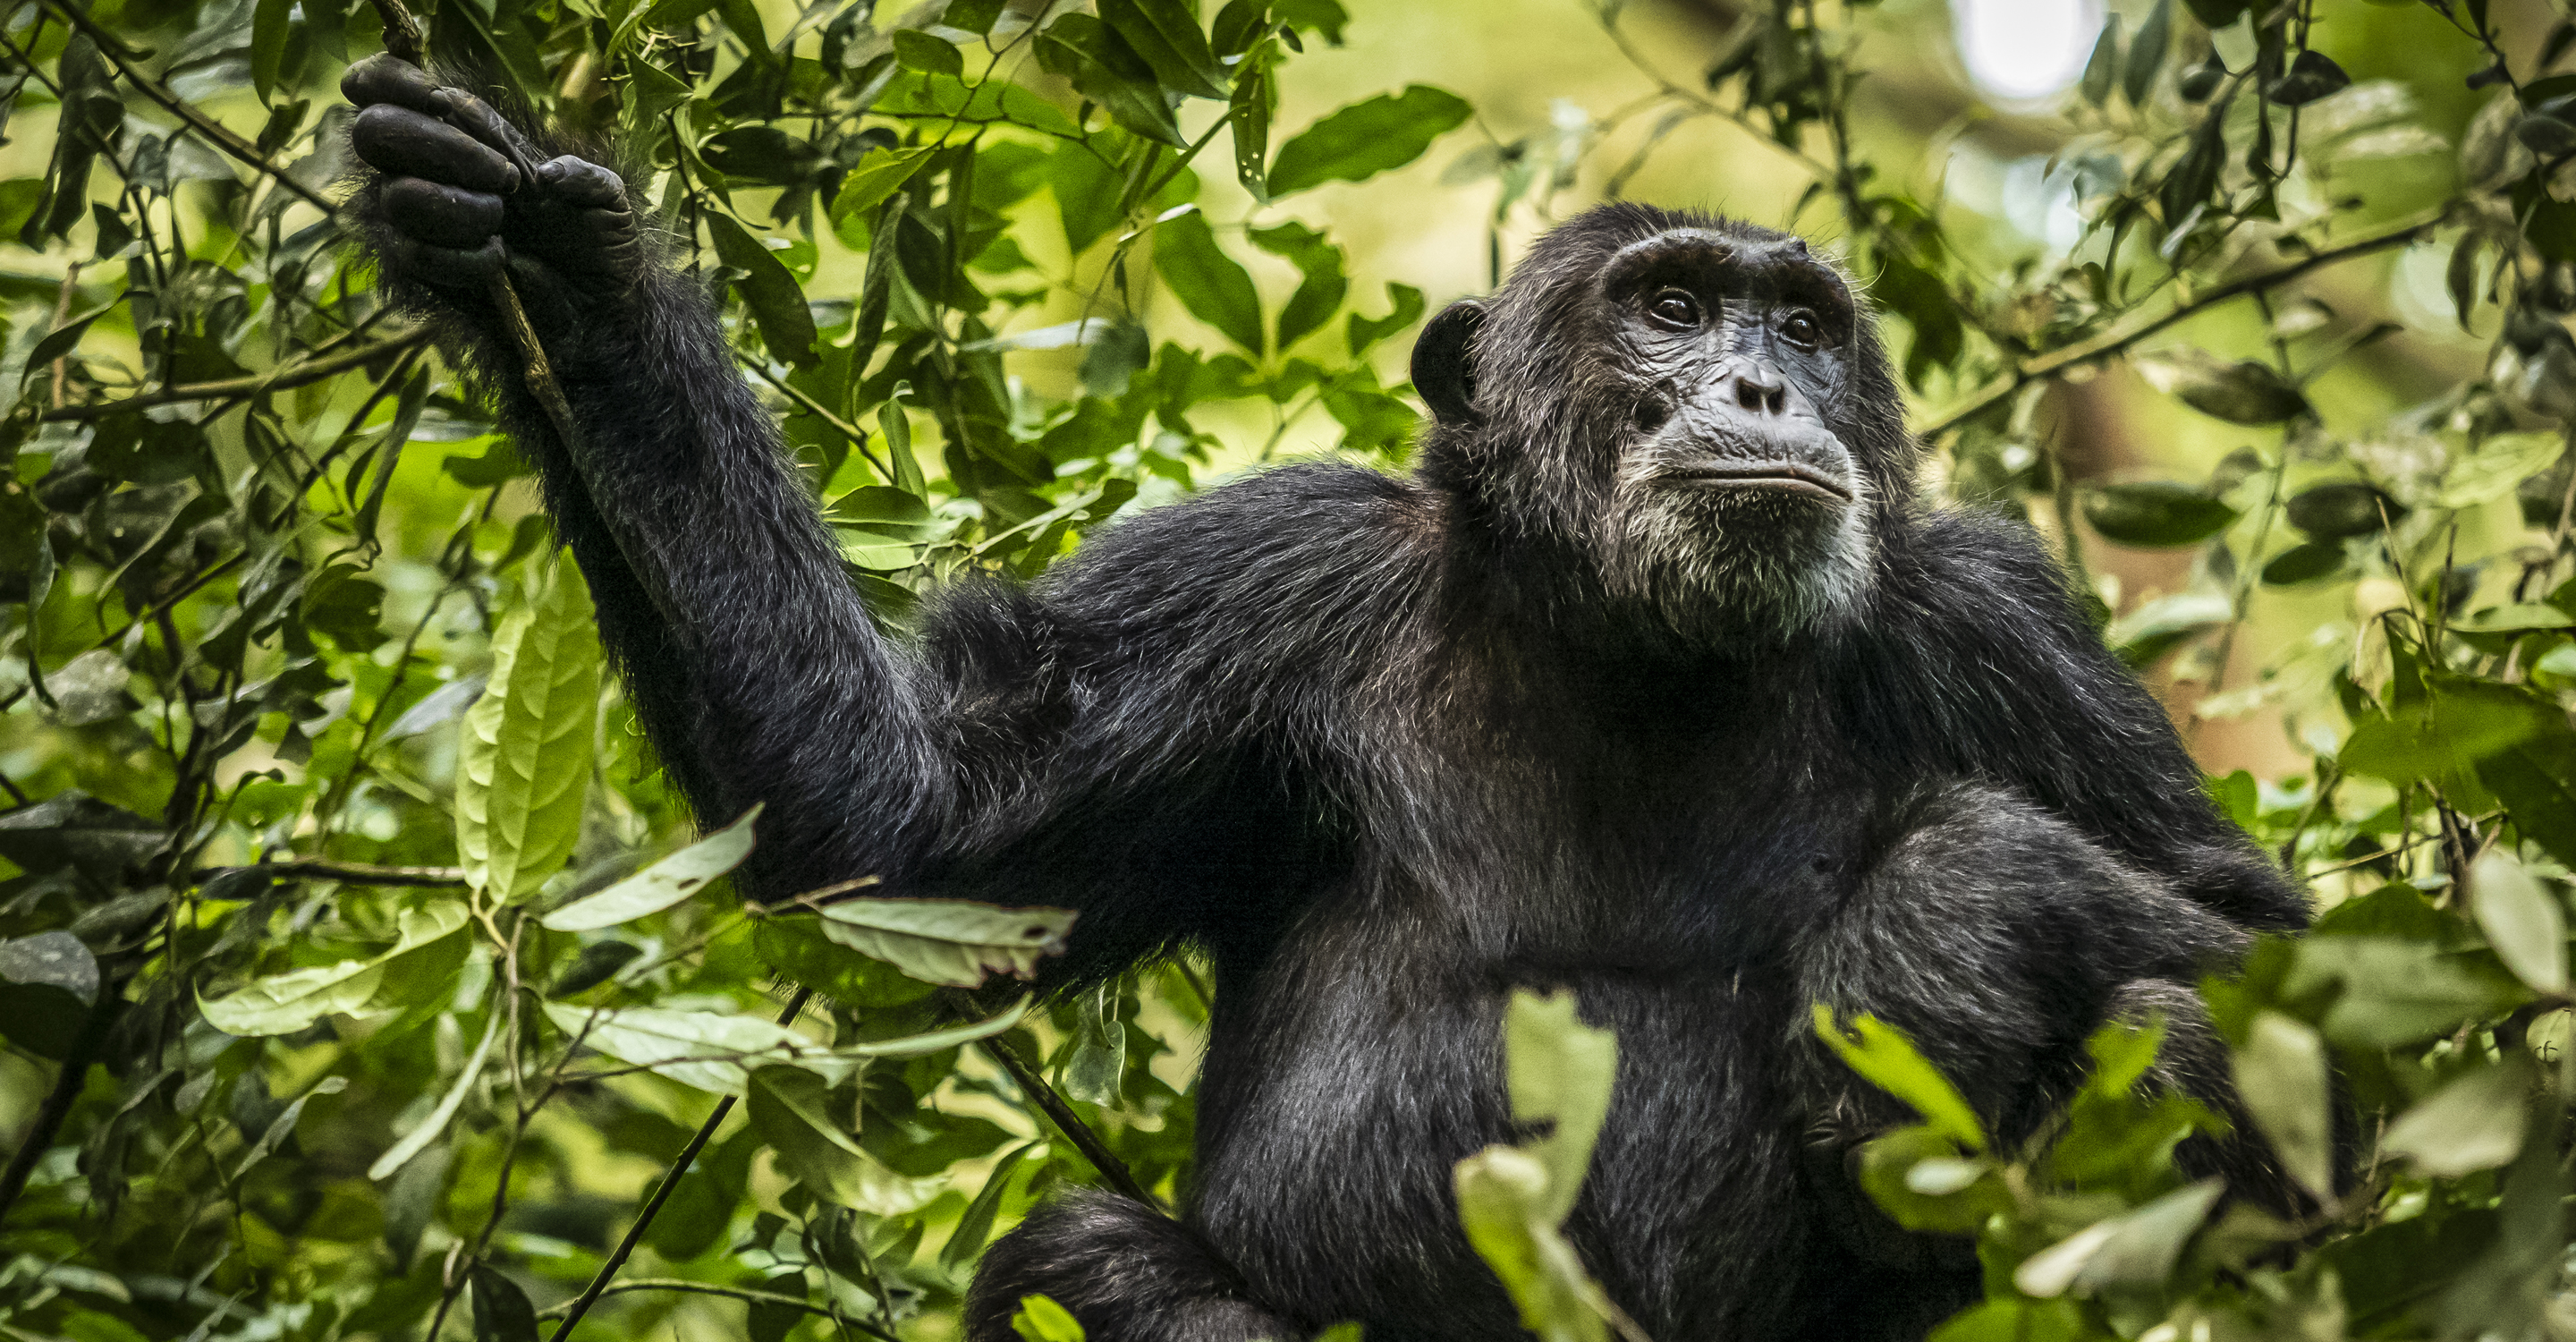 Close-up of a chimpanzee in a tree in Kibale National Park, Uganda